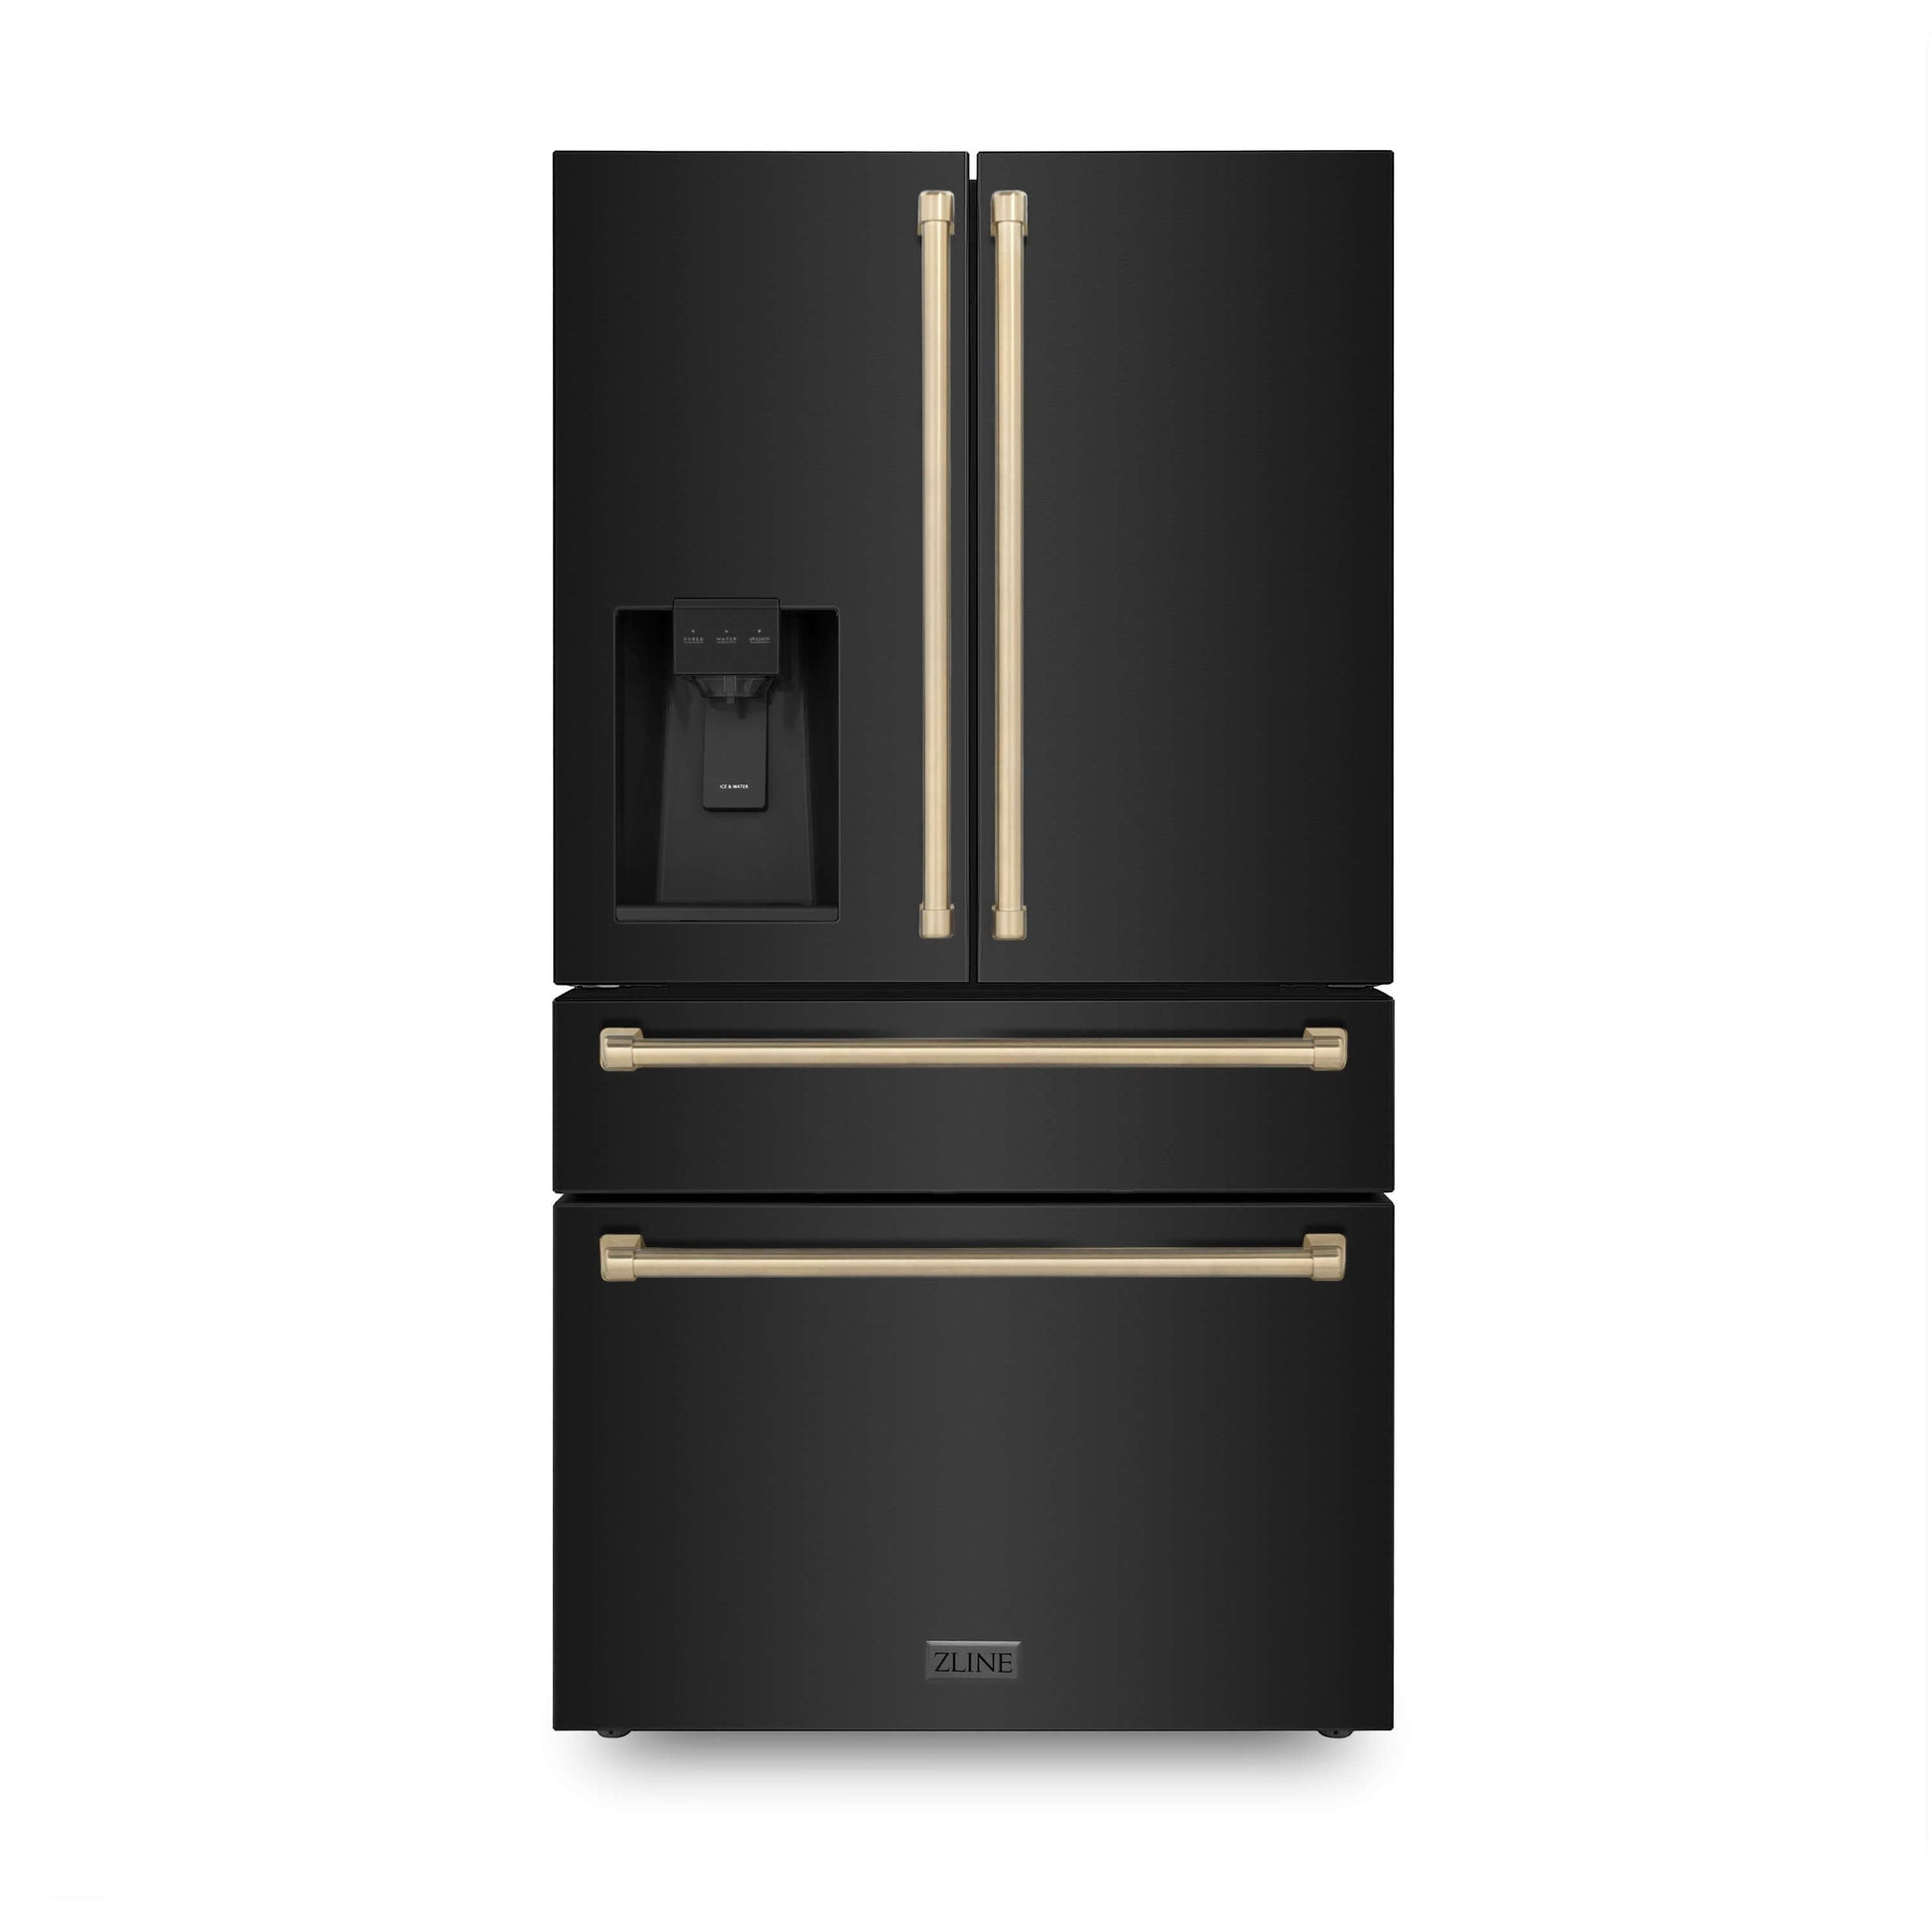 ZLINE Autograph Edition 36 in. 21.6 cu. ft Freestanding French Door Refrigerator with Water and Ice Dispenser in Fingerprint Resistant Black Stainless Steel with Champagne Bronze Accents (RFMZ-W-36-BS-CB) front.